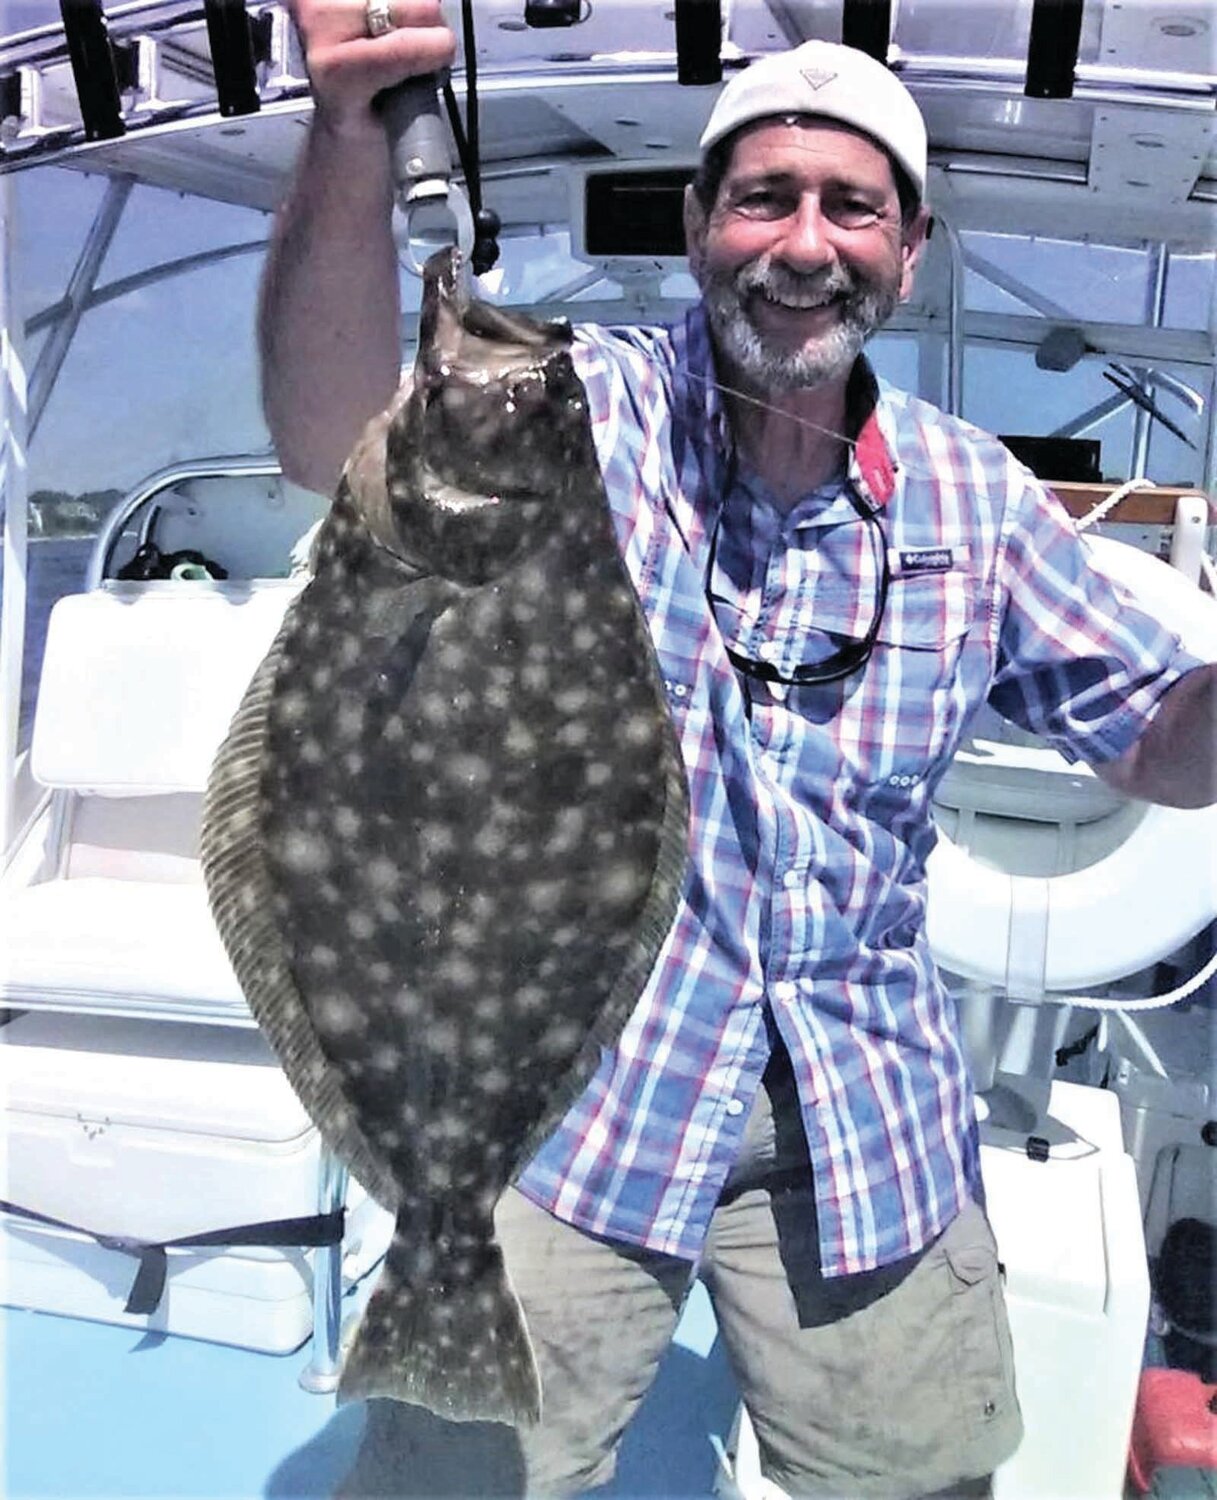 DOG DAYS OF SUMMER: Capt. Dave Monti with a summer flounder (fluke) caught during the dog days of summer at Austin Hollow, a 70’ underwater valley on the west side of Beavertail, Jamestown. (Submitted photos)